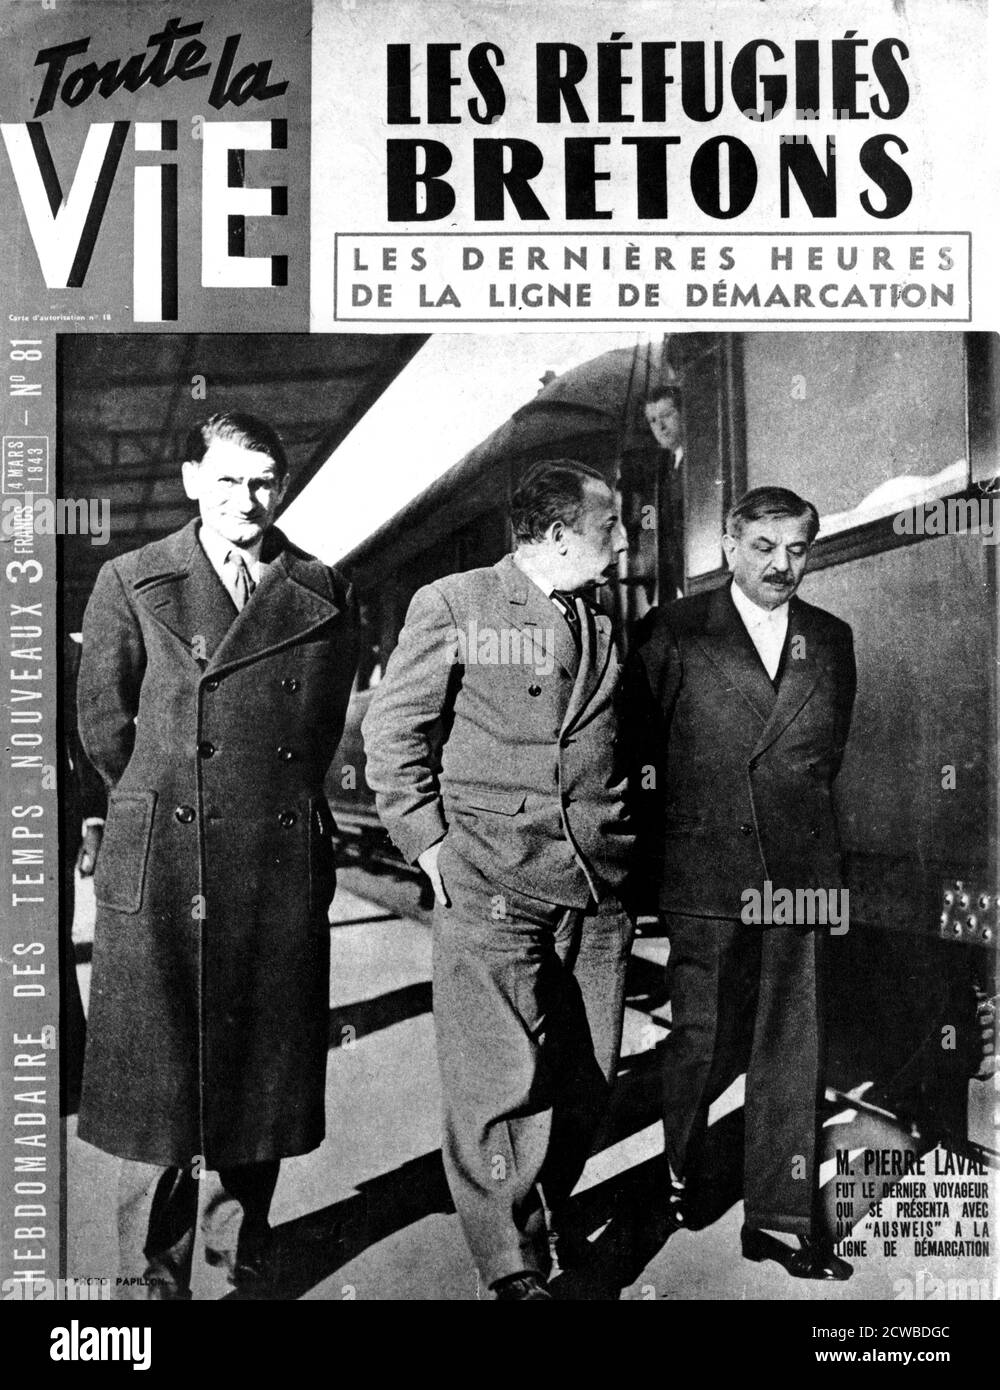 End of the line of demarcation between German-occupied and Vichy France, November 1942 (March 1943). Cover of a French magazine. After the Allies landed in North Africa in Operation Torch the Germans occupied the part of France governed by the Vichy regime under the terms of the armistice agreed in 1940. Pierre Laval (right) was the last traveller to present himself with a pass at the line of demarcation before its abolition. The photographer is unknown. Rights information: Cleared for Editorial Use Only. Please Contact Us For Any Other Clearance Rights. Stock Photo